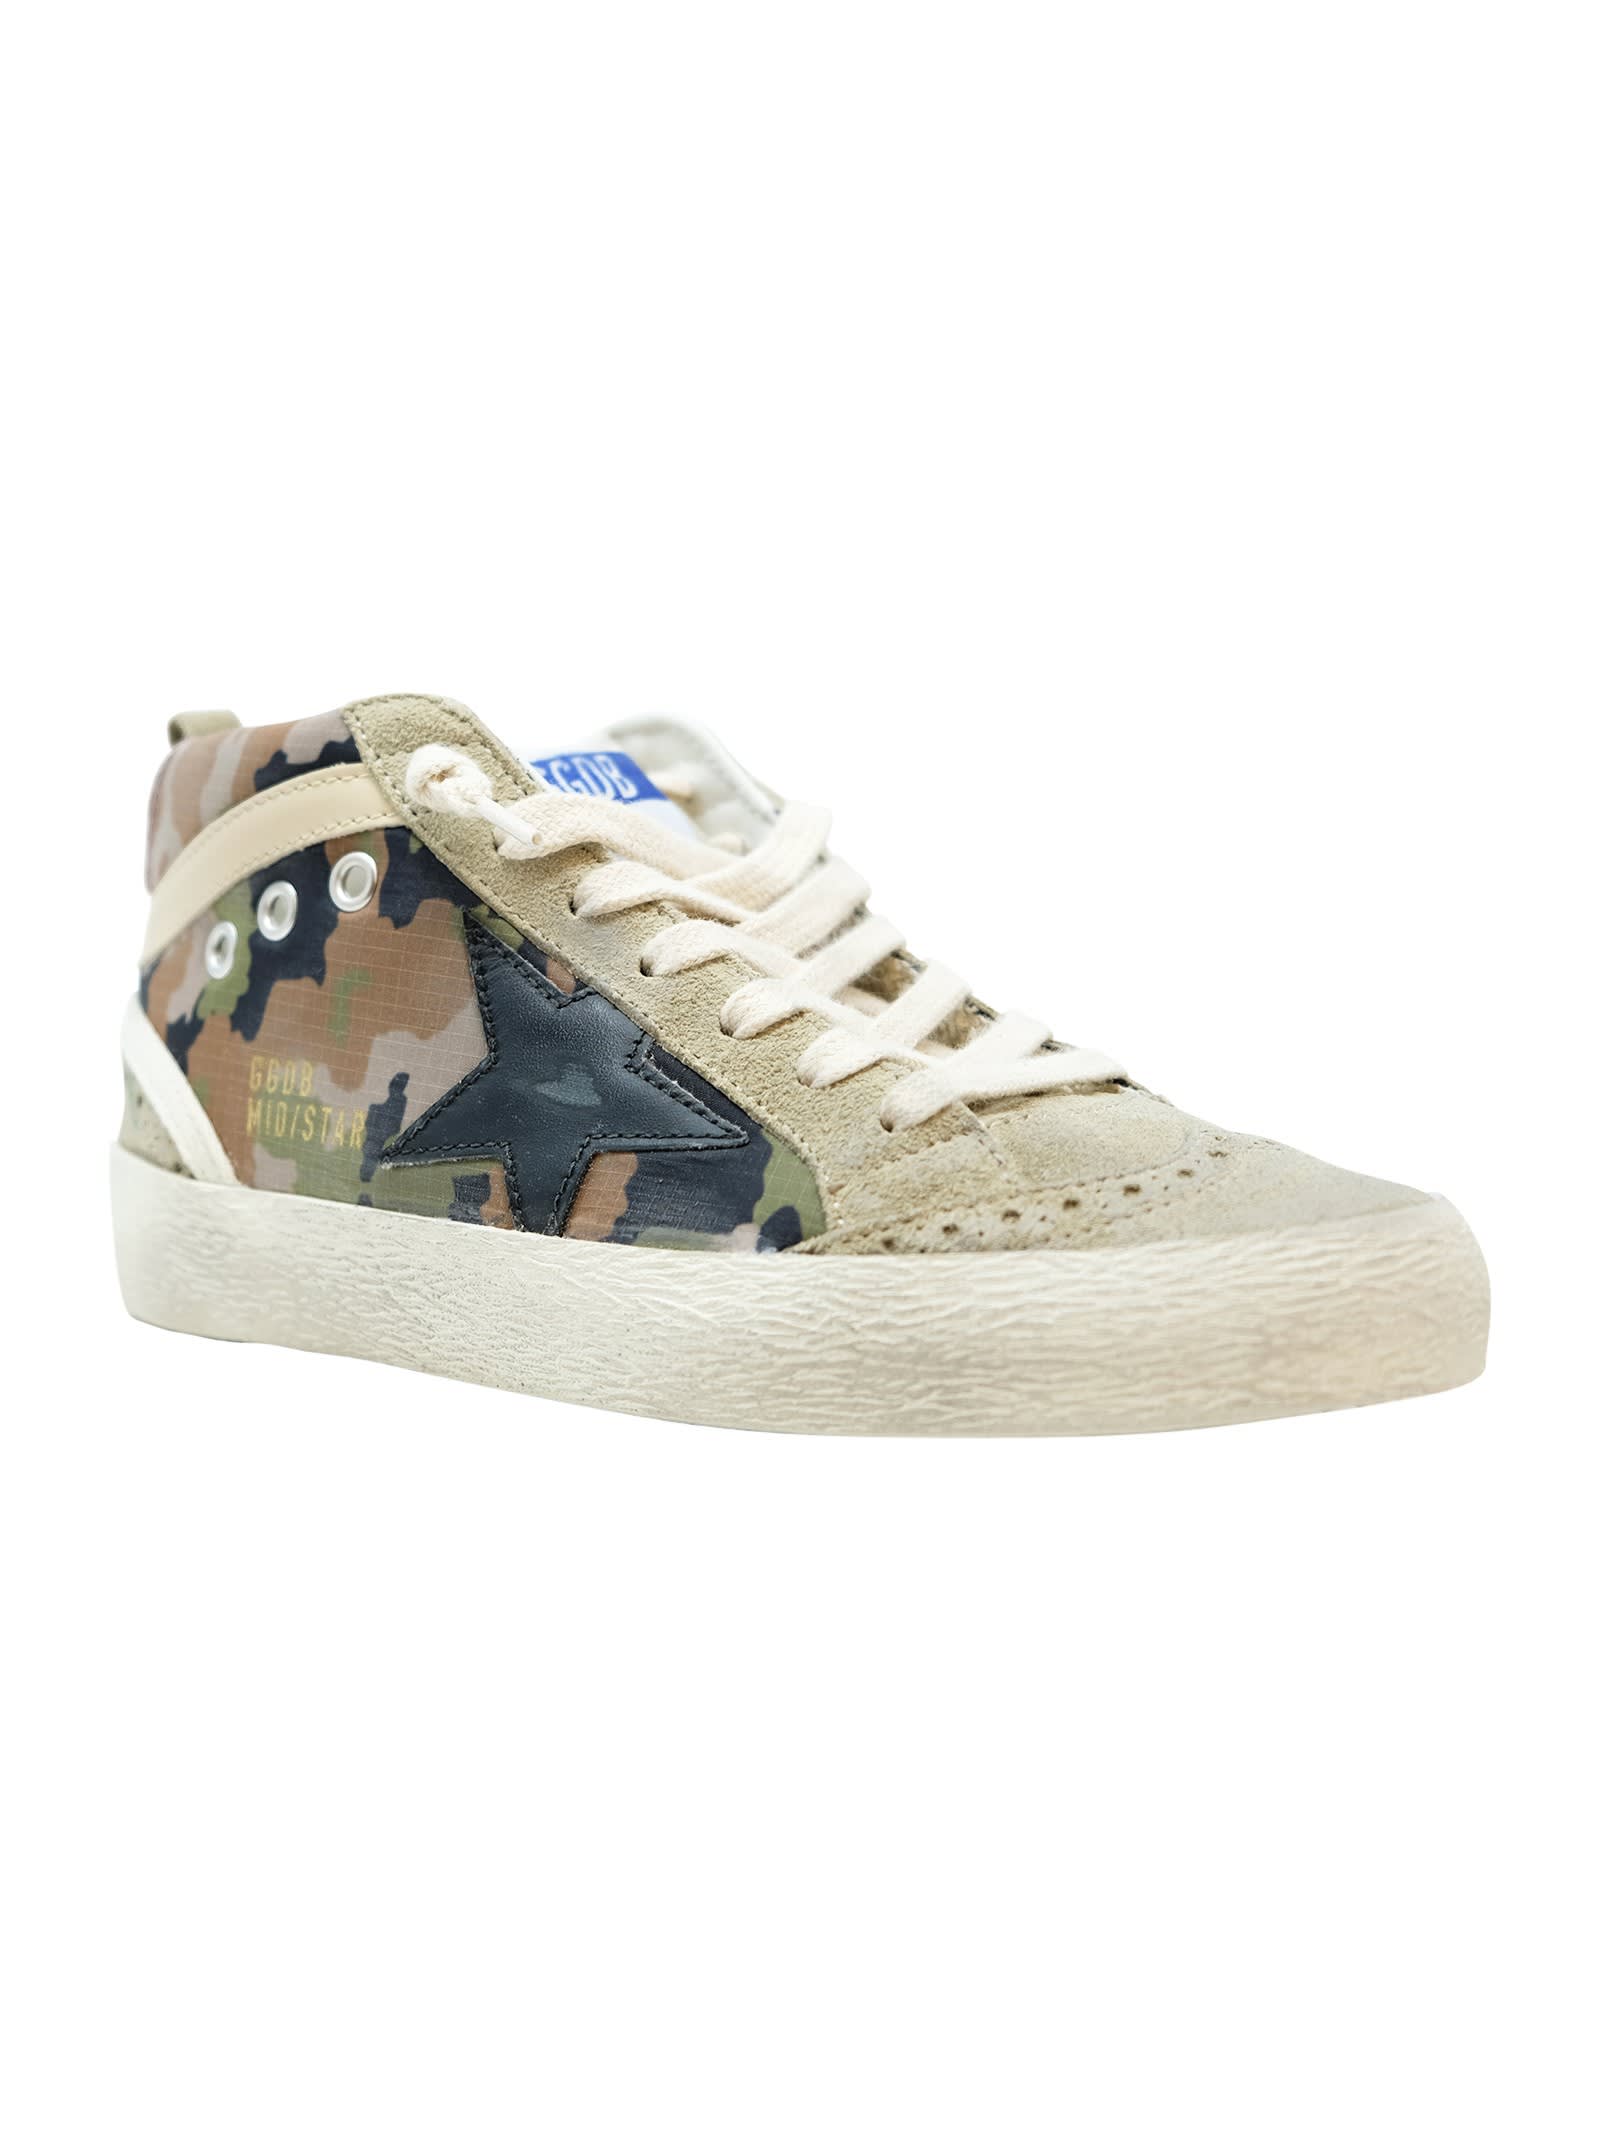 Shop Golden Goose Camouflage Leather Mid Star Sneakers